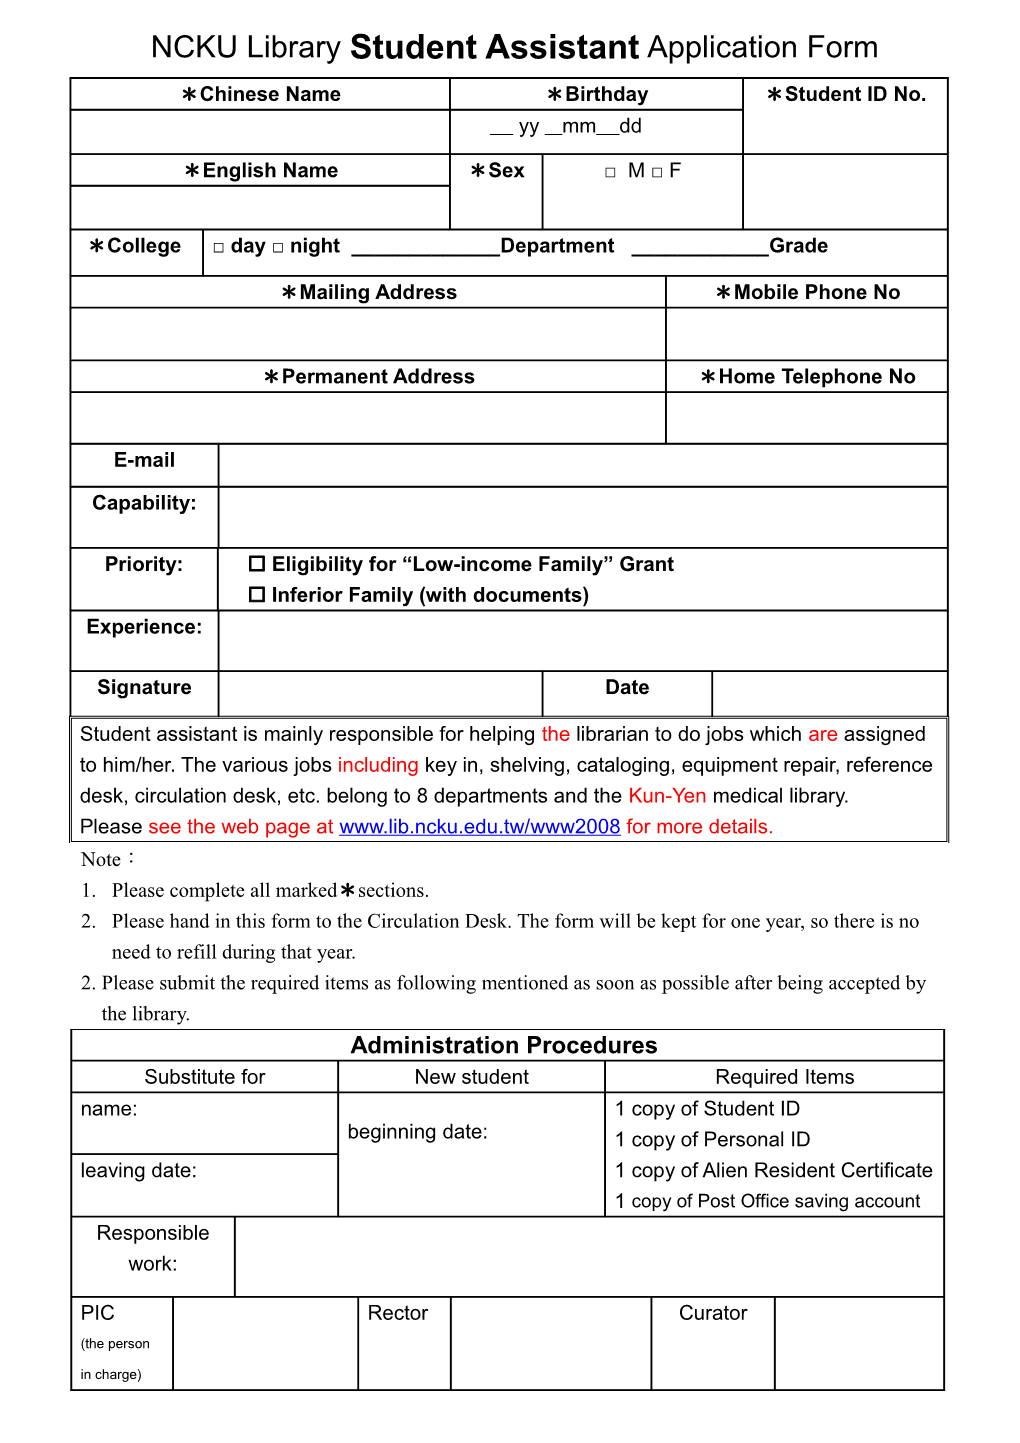 NCKU Library Student Assistant Application Form